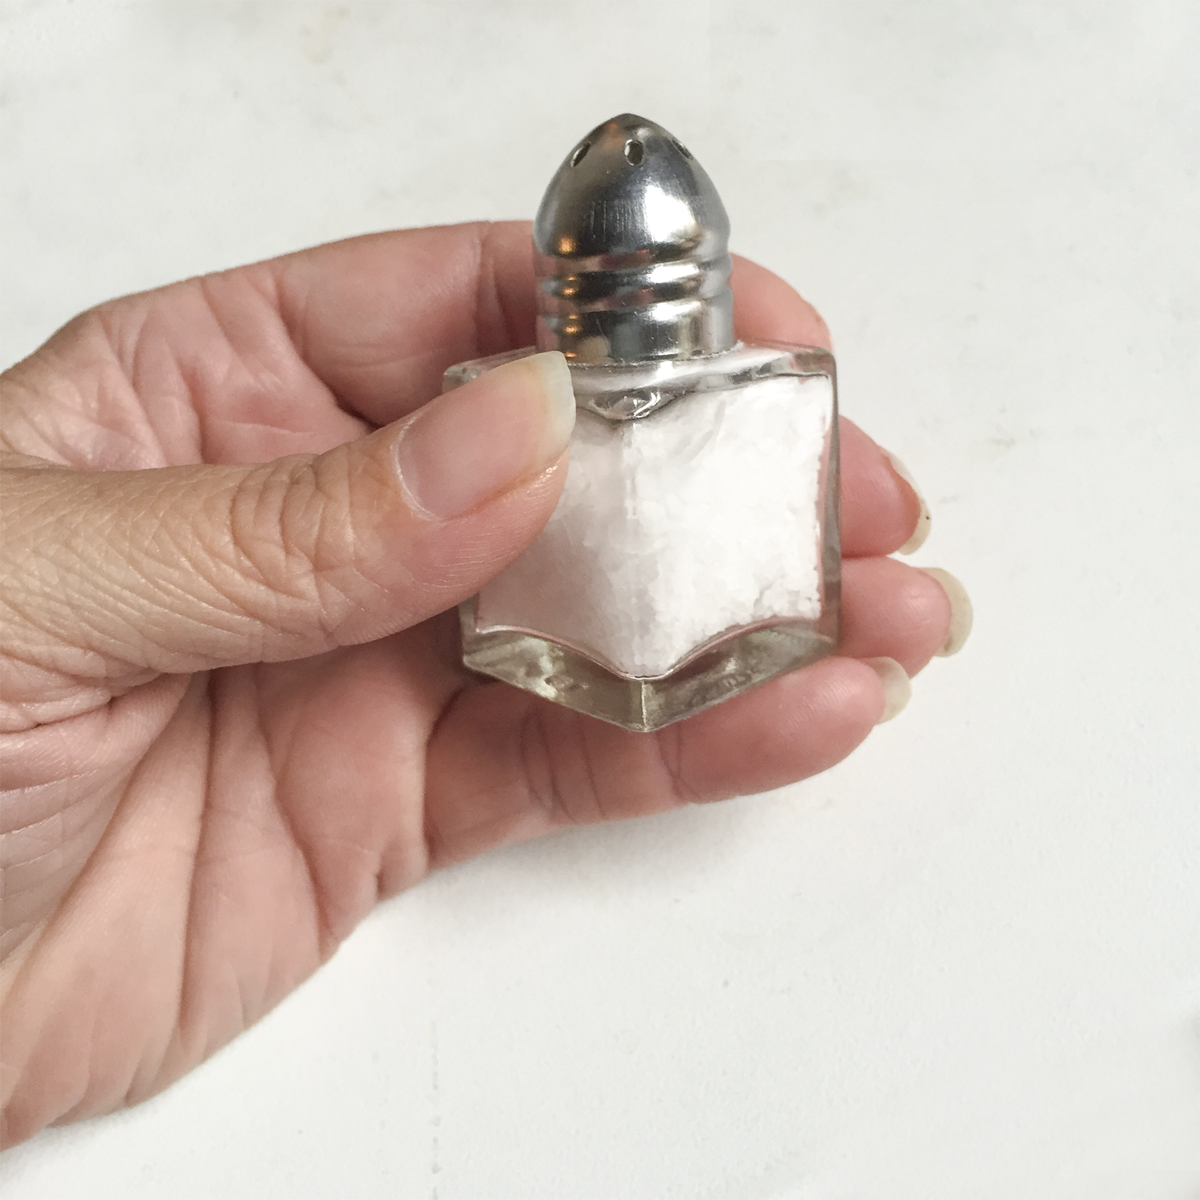 A photo of a small salt shaker. A woman's hand holds a small, cubic shaped salt shaker that has an approximate edge length of the width of 2 of her fingers.